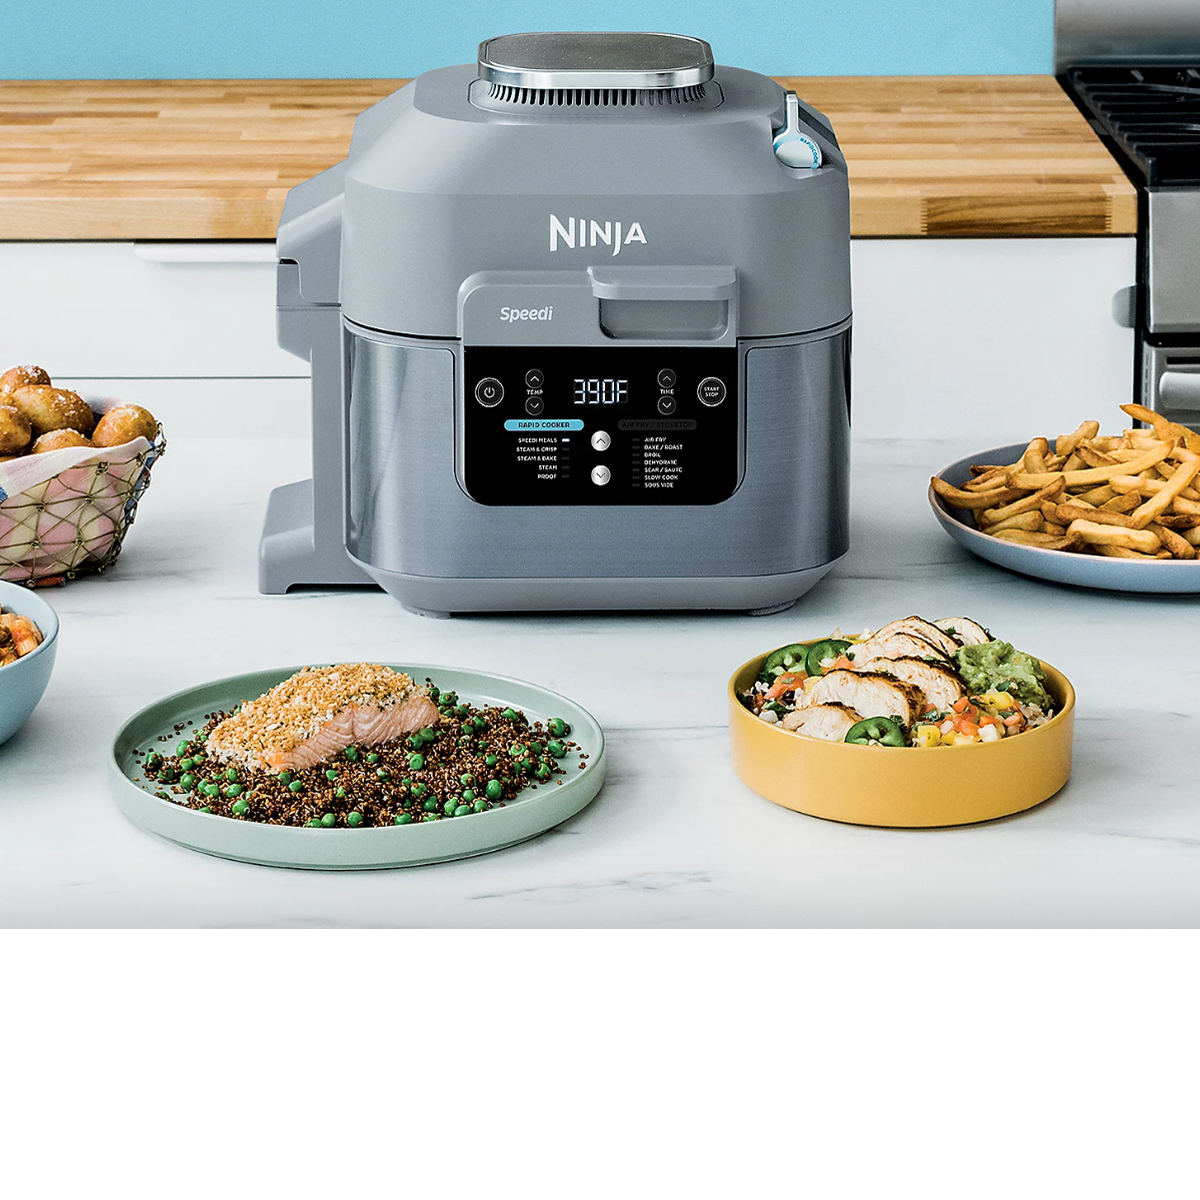 Ninja Speedi Air Fryer review: I used this air fryer to cook a roast in 30  minutes